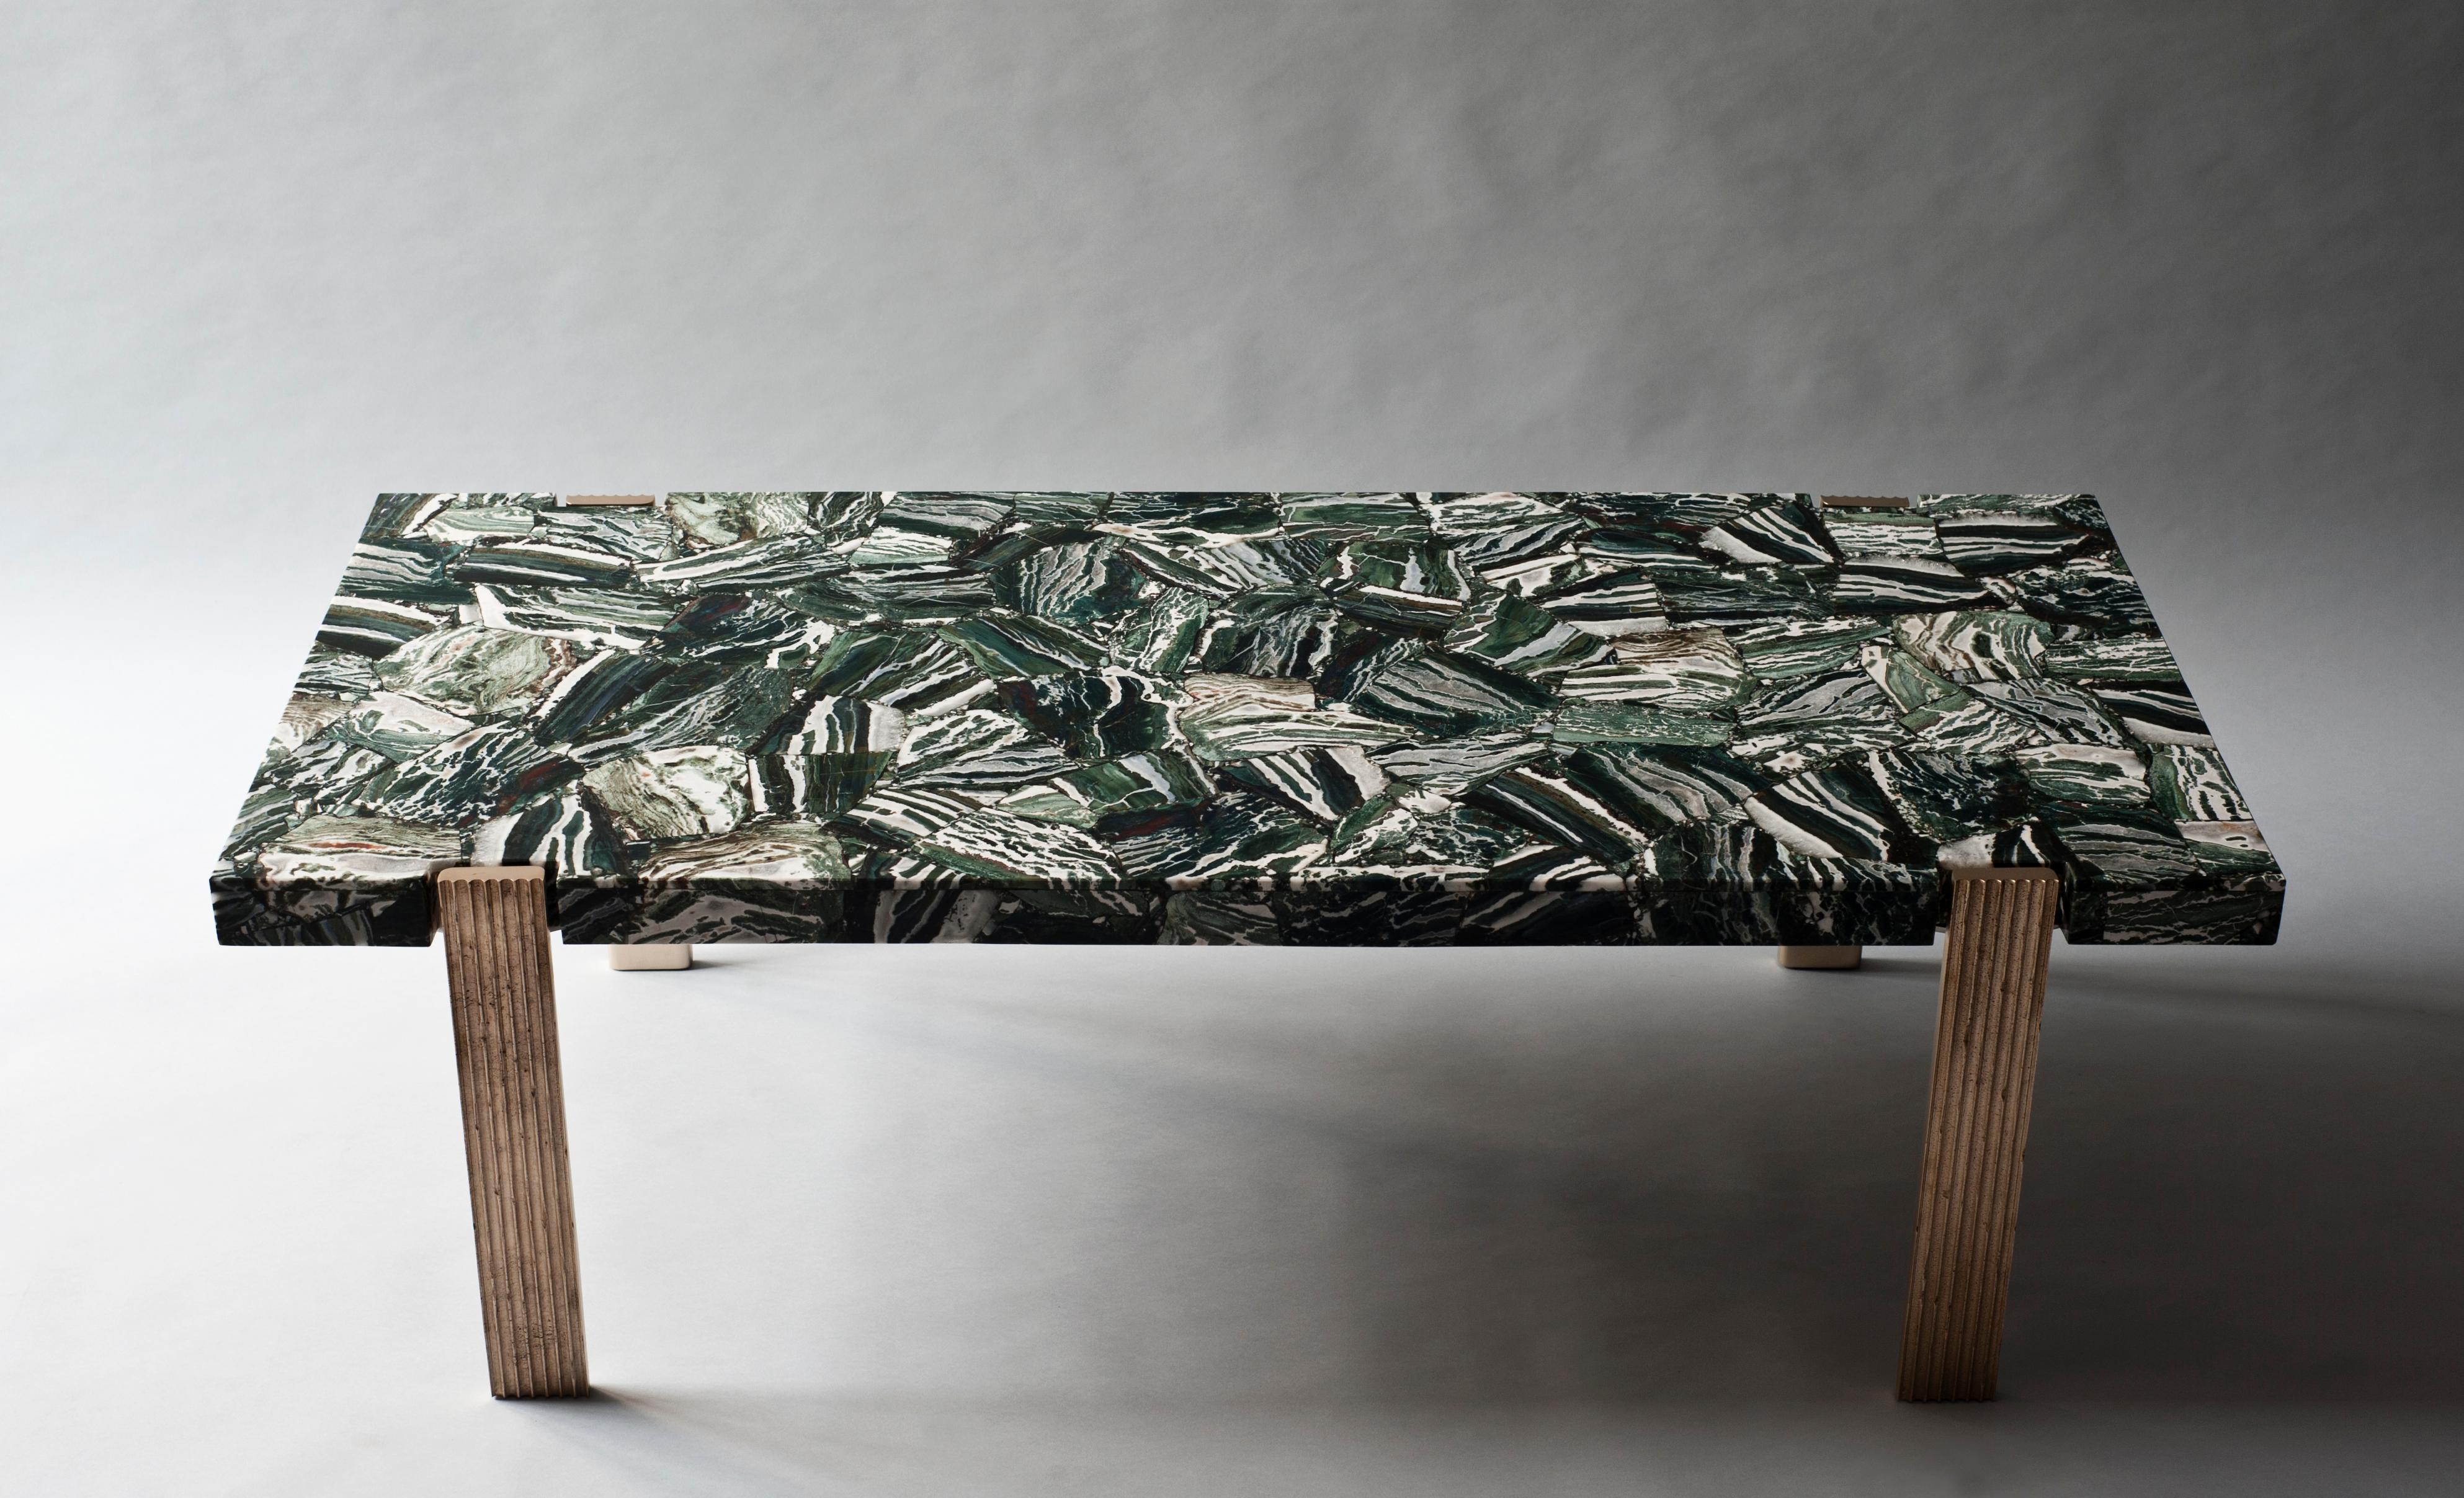 Capital coffee table by DeMuro Das 
Dimensions: W 135 x D 60 x H 43 cm
Materials: Agate (Green Zebra ) - Polished (Random) tabletop
 Solid Bronze (Antique) Legs

 Dimensions and finishes can be customized.

DeMuro Das is an international